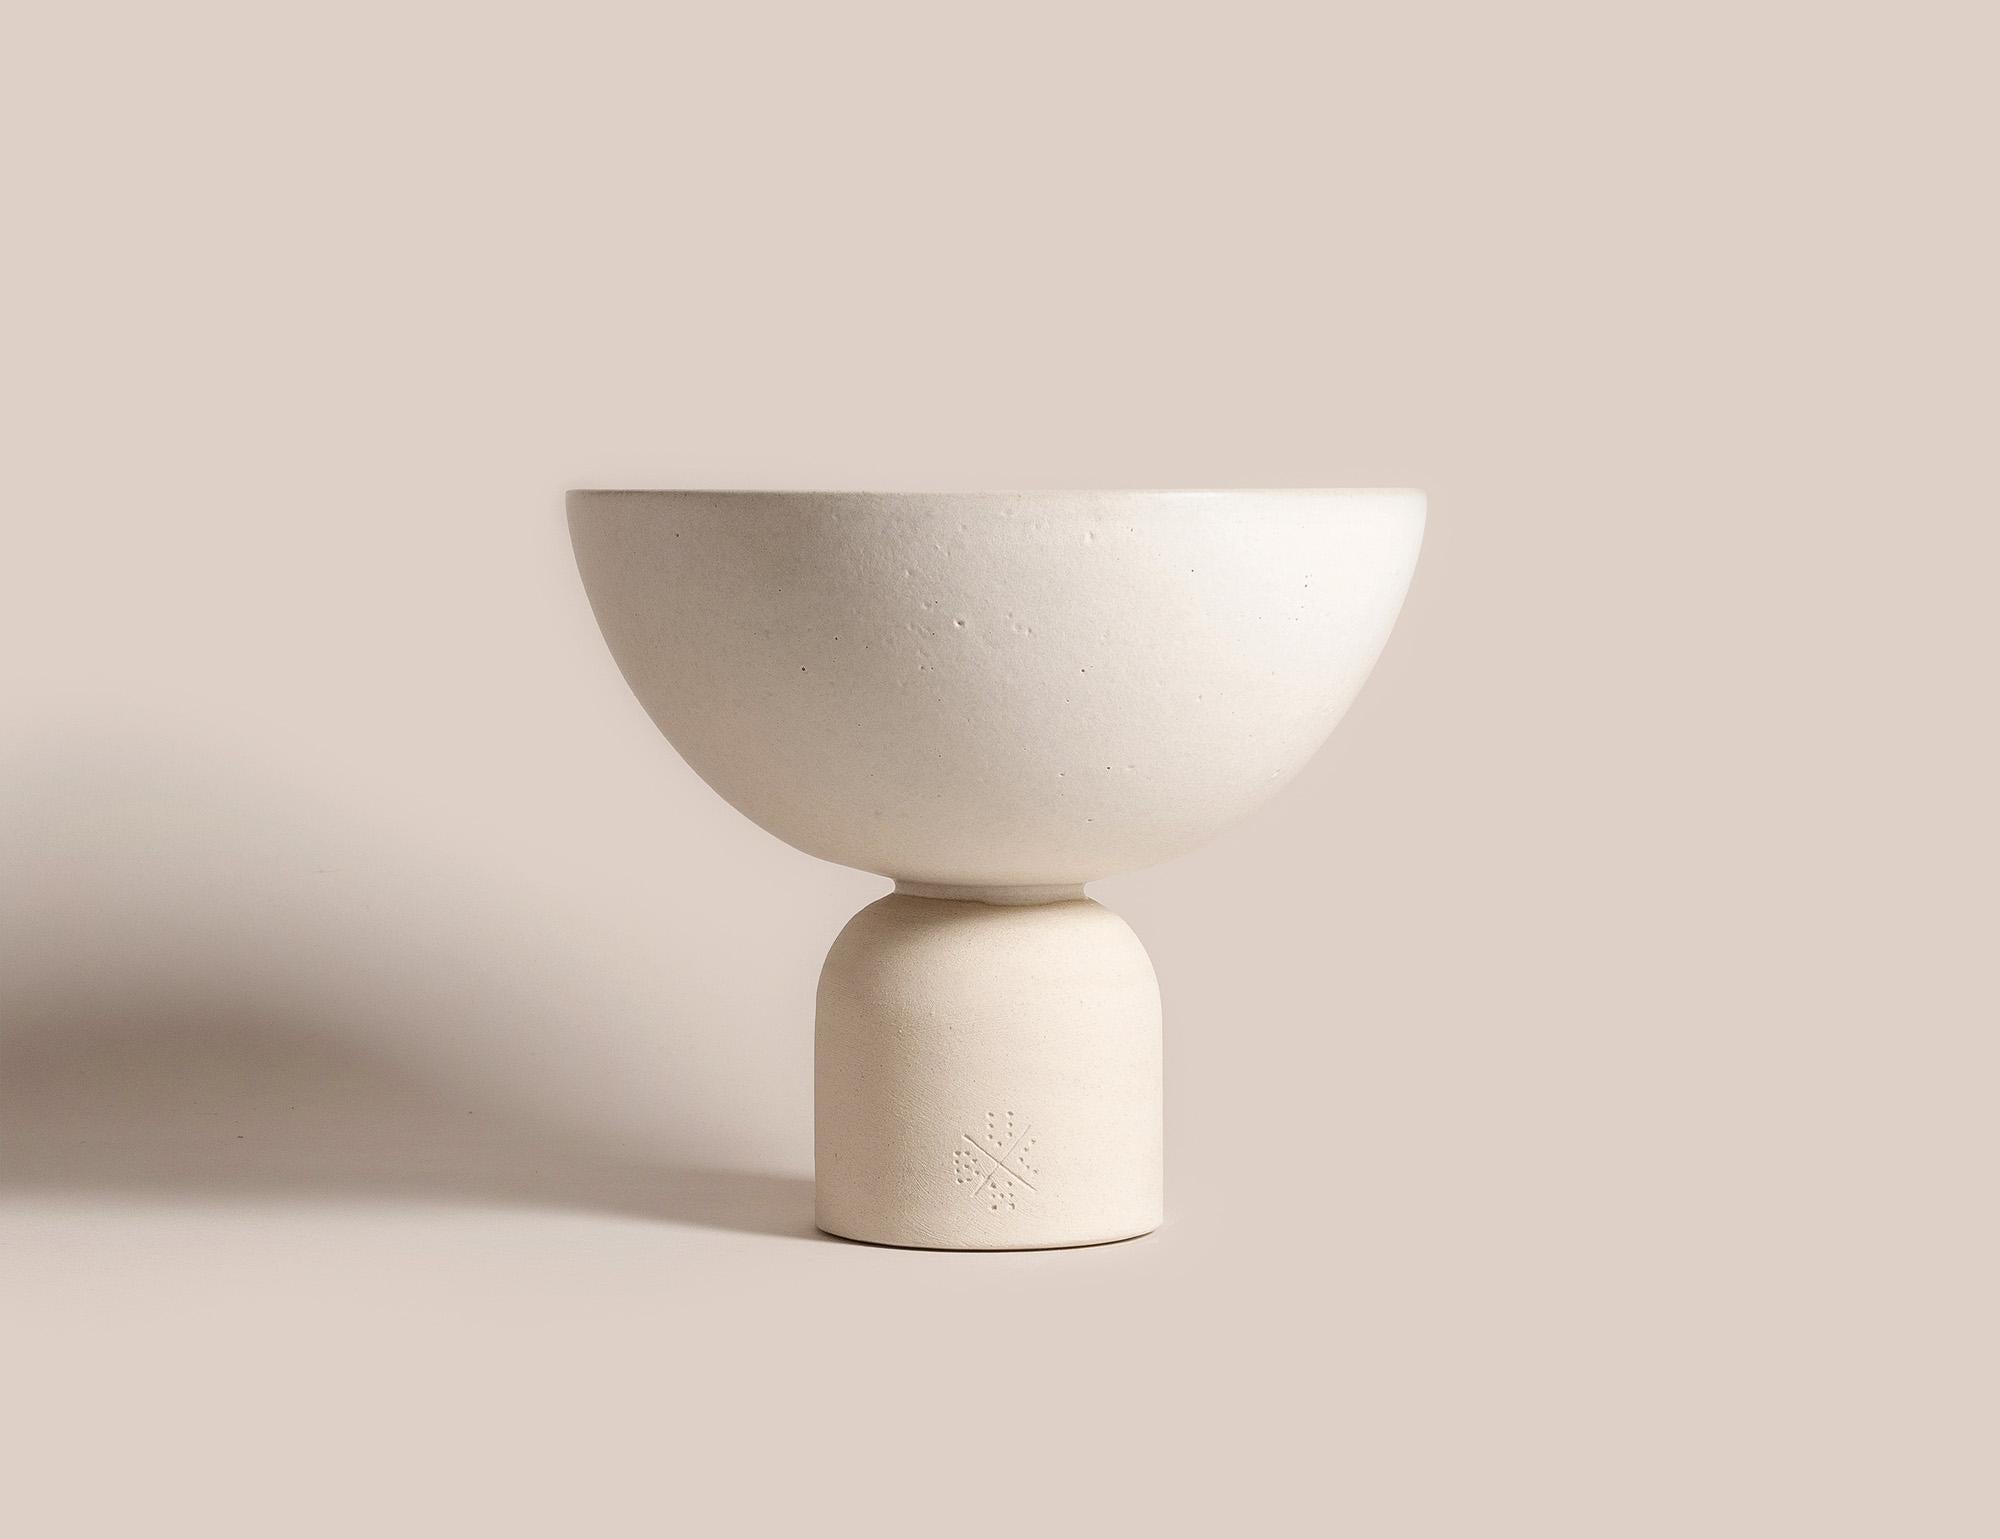 Handcrafted 015 coupe by Lovebuch
Dimensions: Ø 21 x H 16 cm
Materials: Sandstone, handcrafted piece.

Katia works with wood and clay, these raw, powerfully expressive materials are shaped to create a poetry of objects that inhabit our daily